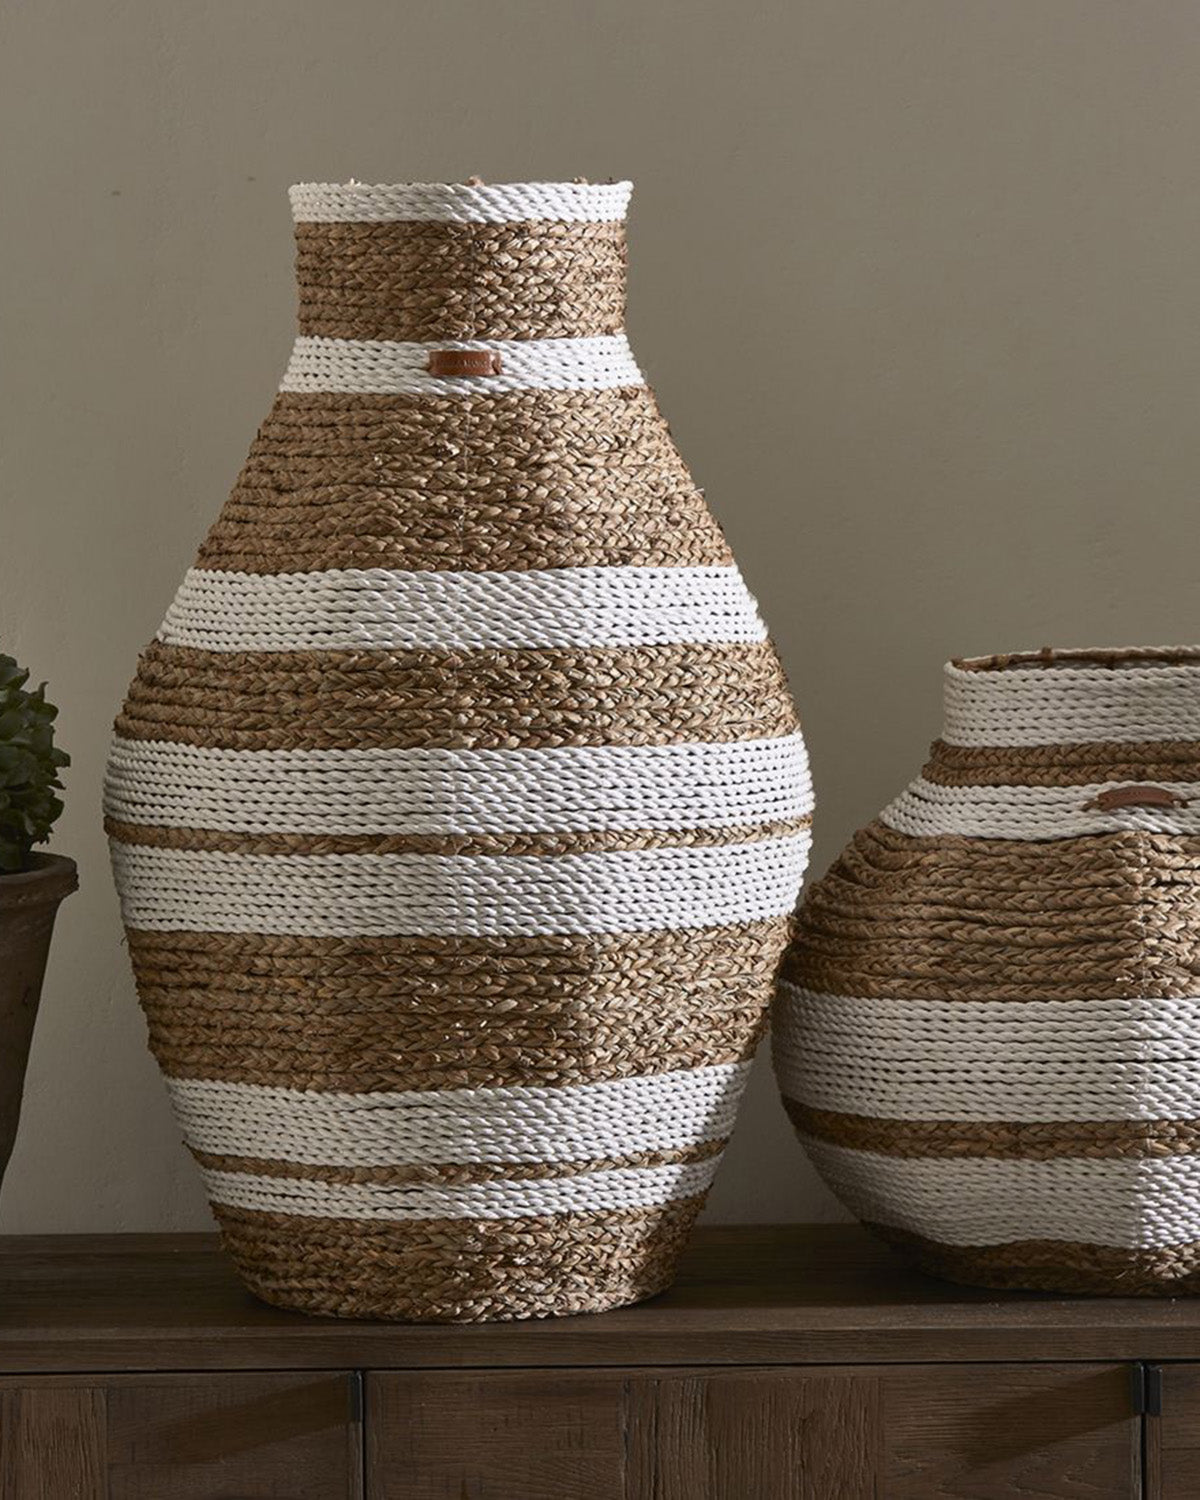 Vase, made of raffia stripped in brown and white by Riviera Maison 